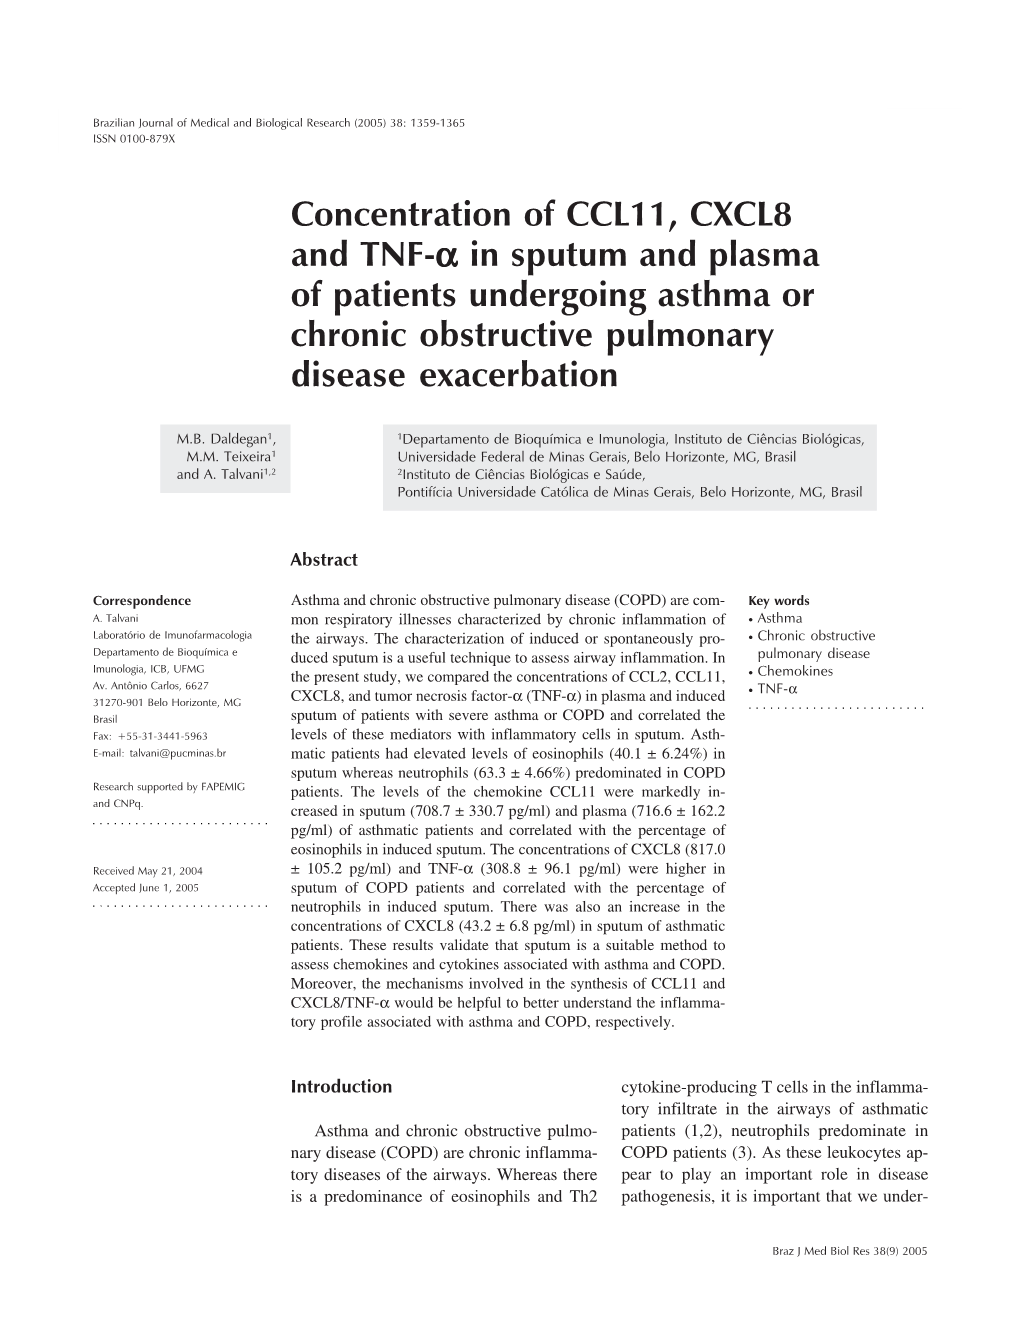 Concentration of CCL11, CXCL8 and TNF-Α in Sputum and Plasma of Patients Undergoing Asthma Or Chronic Obstructive Pulmonary Disease Exacerbation